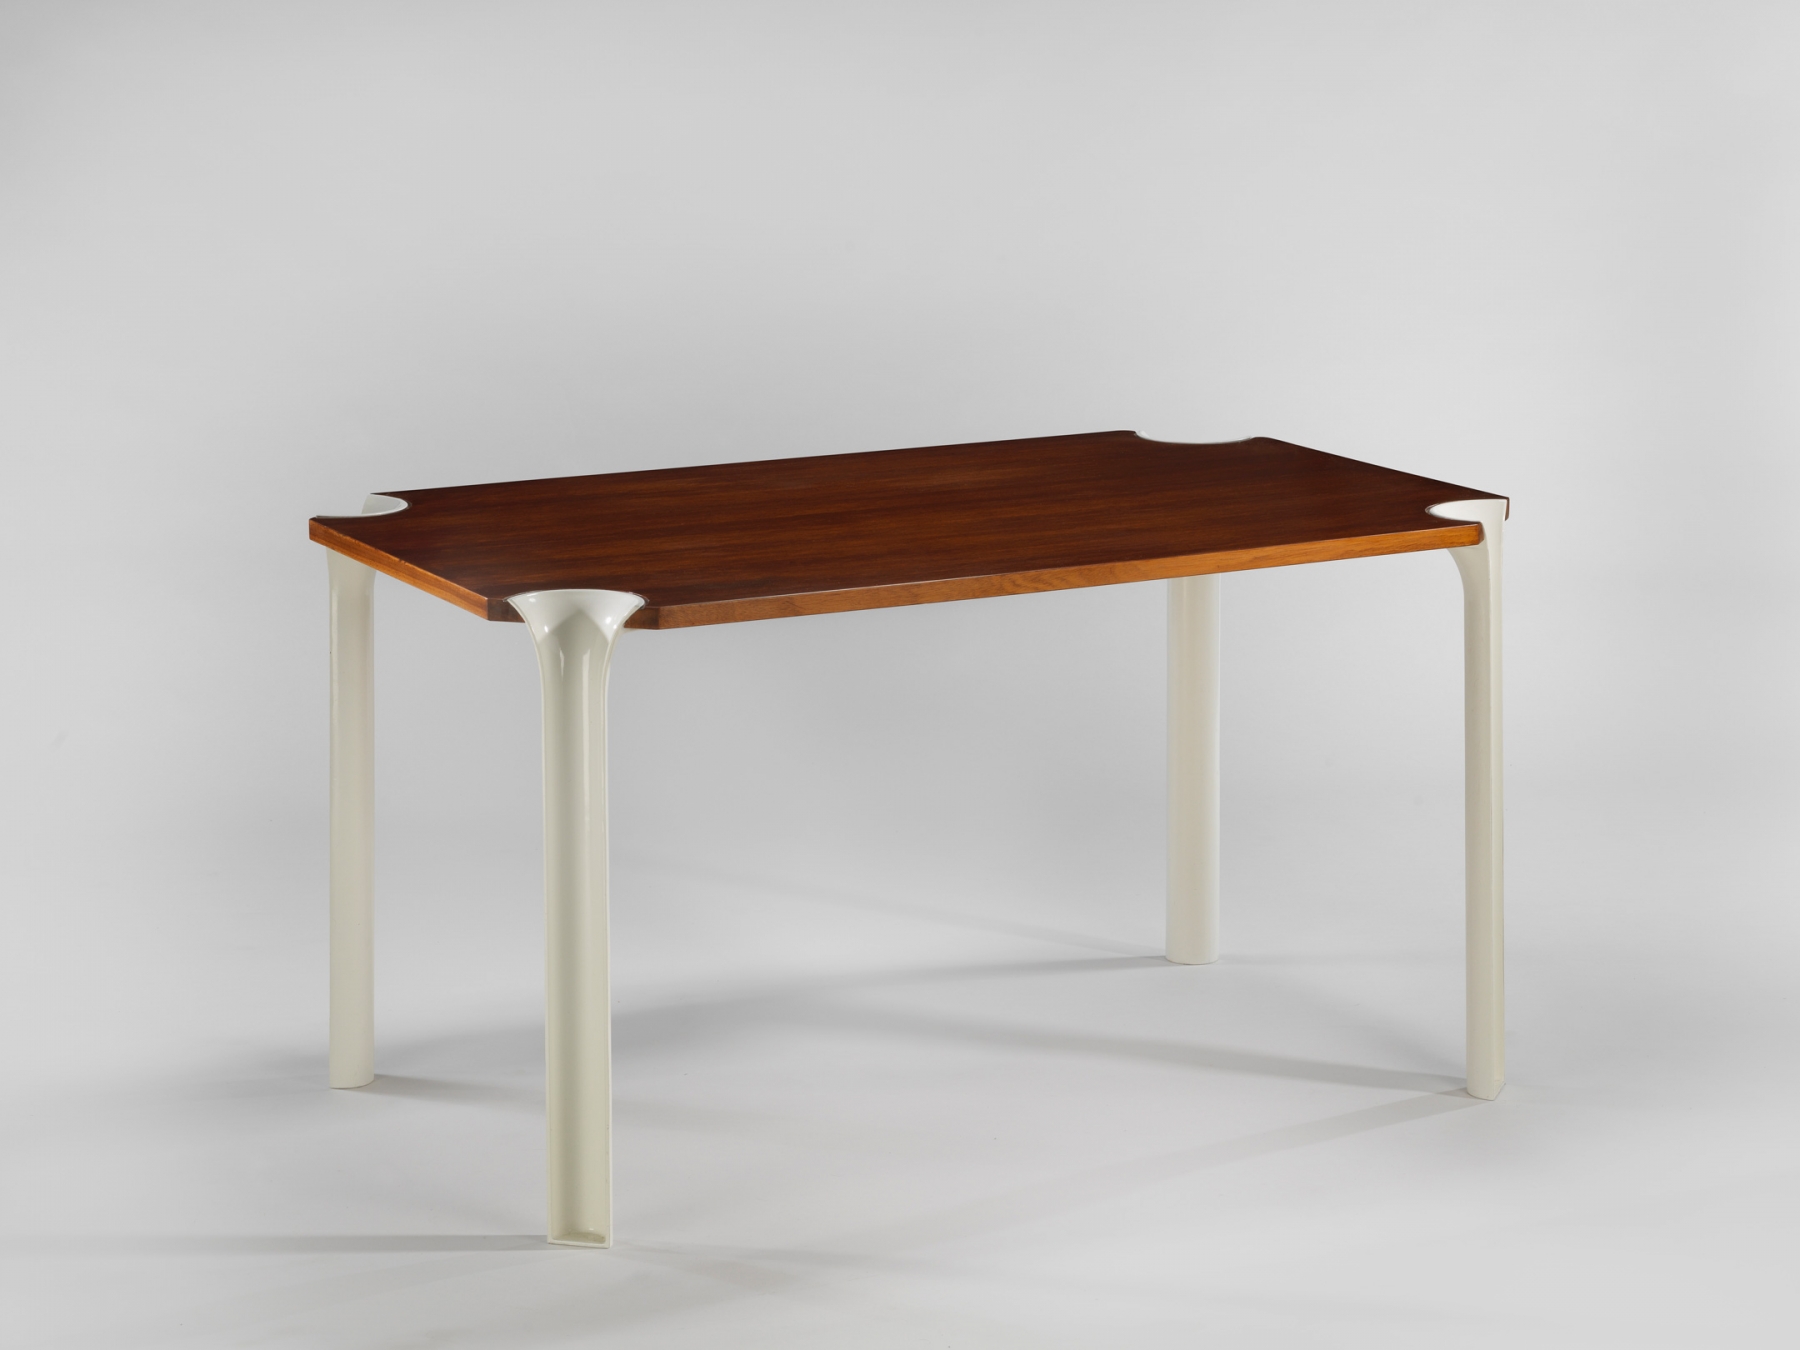 Table from the same program with a Weng&eacute; wood top.
INQUIRE&nbsp;Andr&eacute; Monpoix Table, 1972